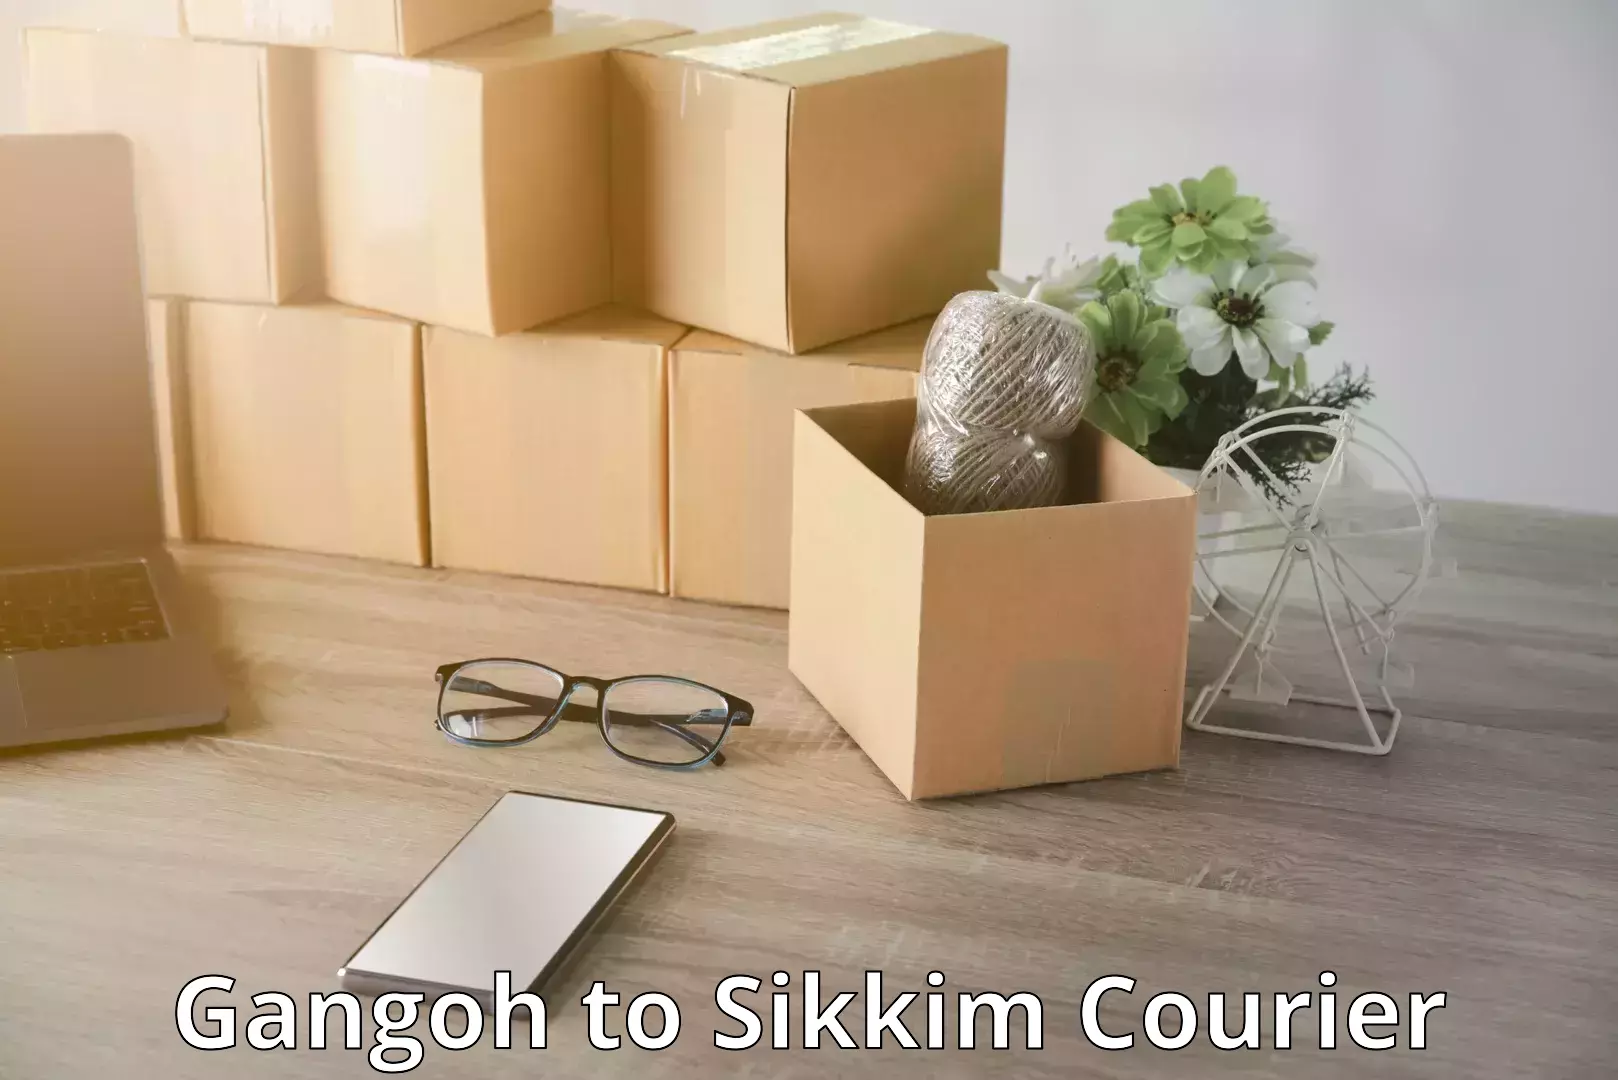 Online luggage shipping booking Gangoh to Sikkim